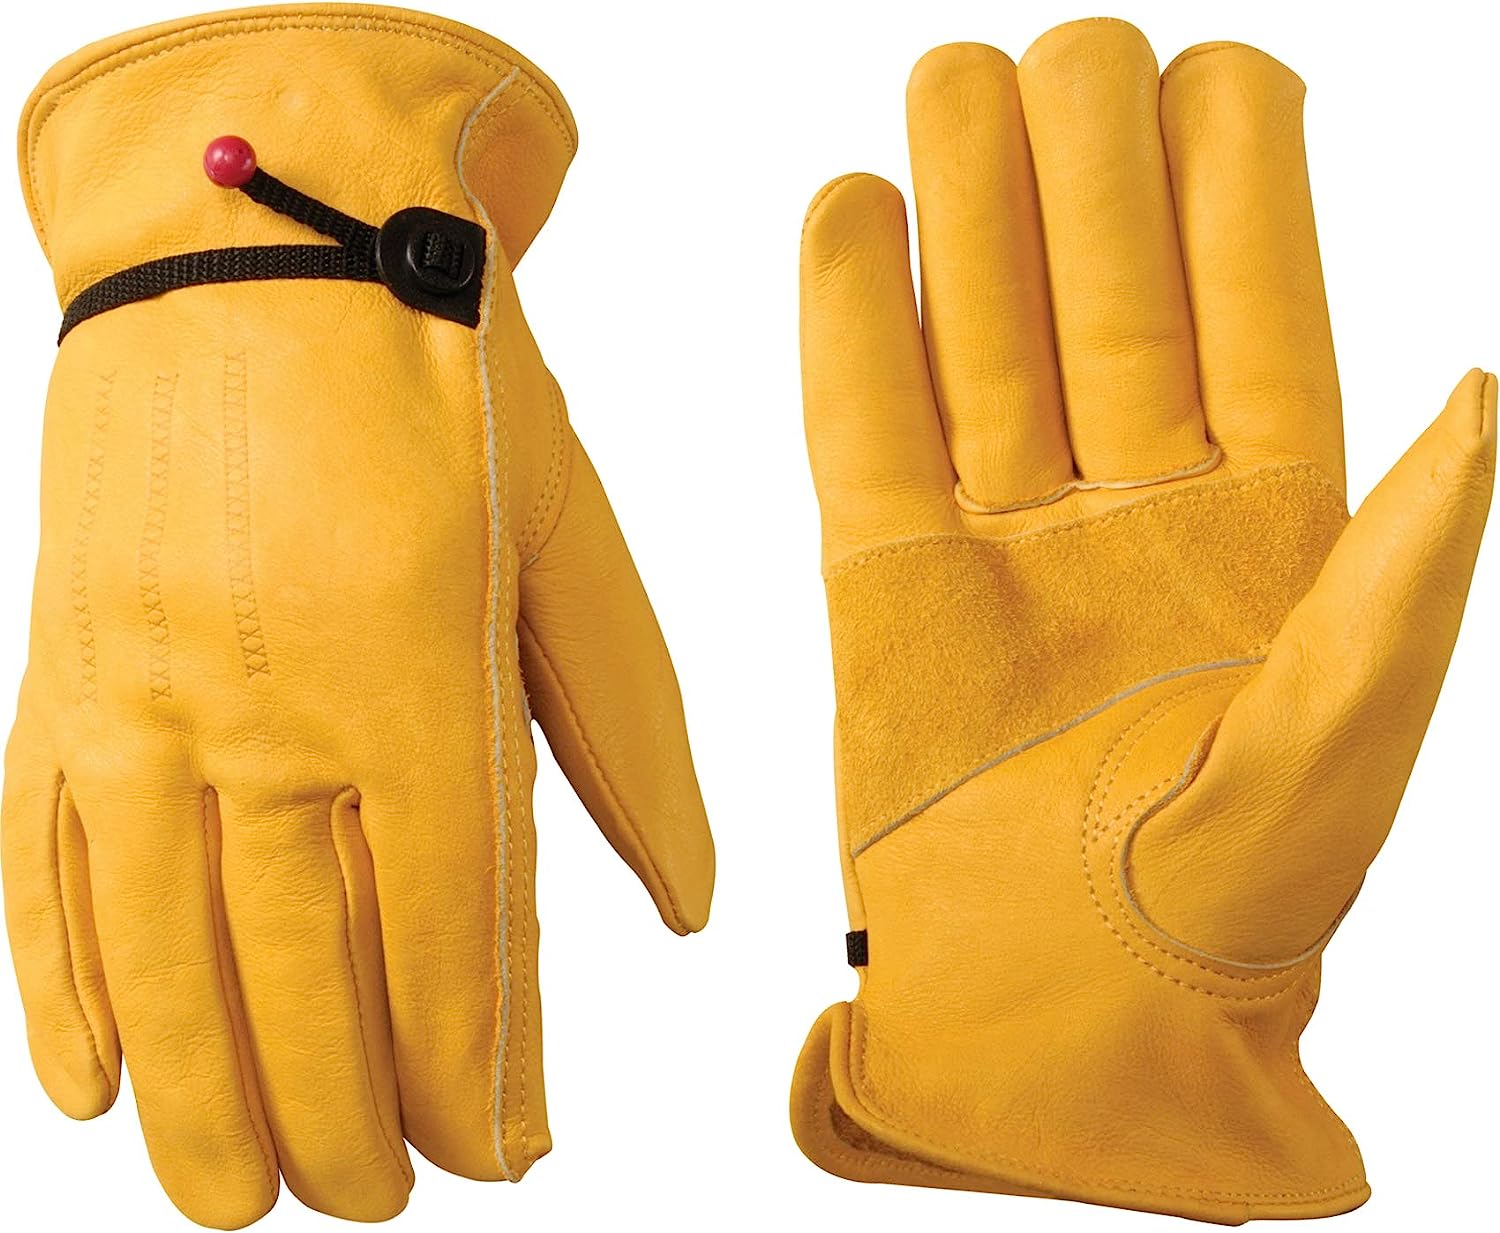 Wells Lamont 1132 Leather Work Gloves with Wrist [...]